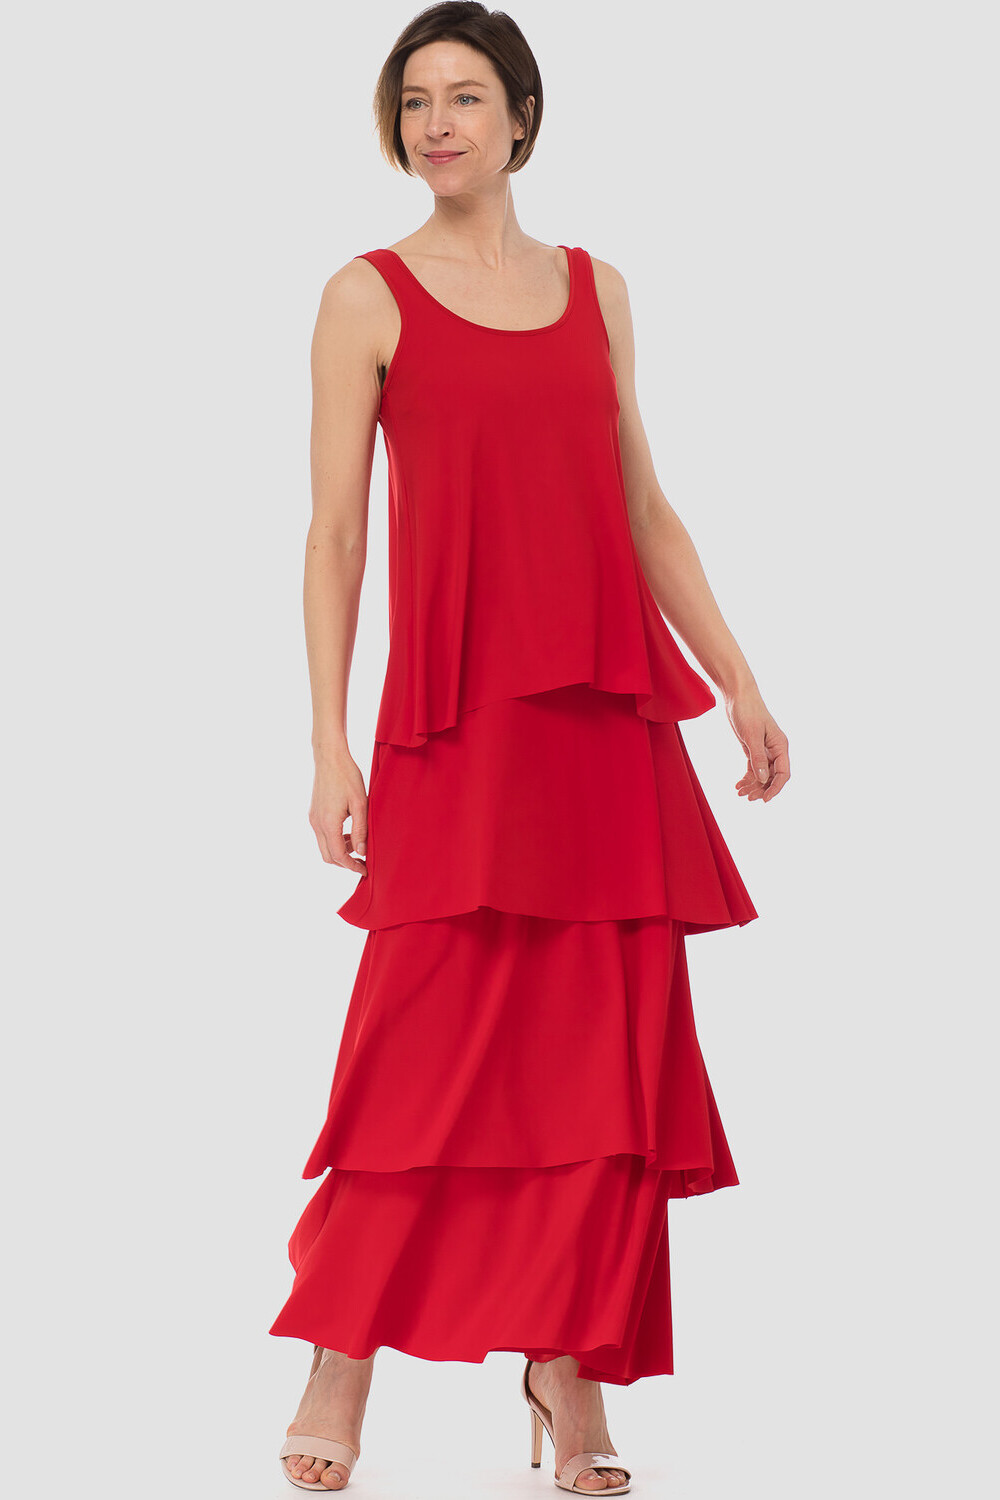 Joseph Ribkoff robe style 182023. Rouge A Levres 173